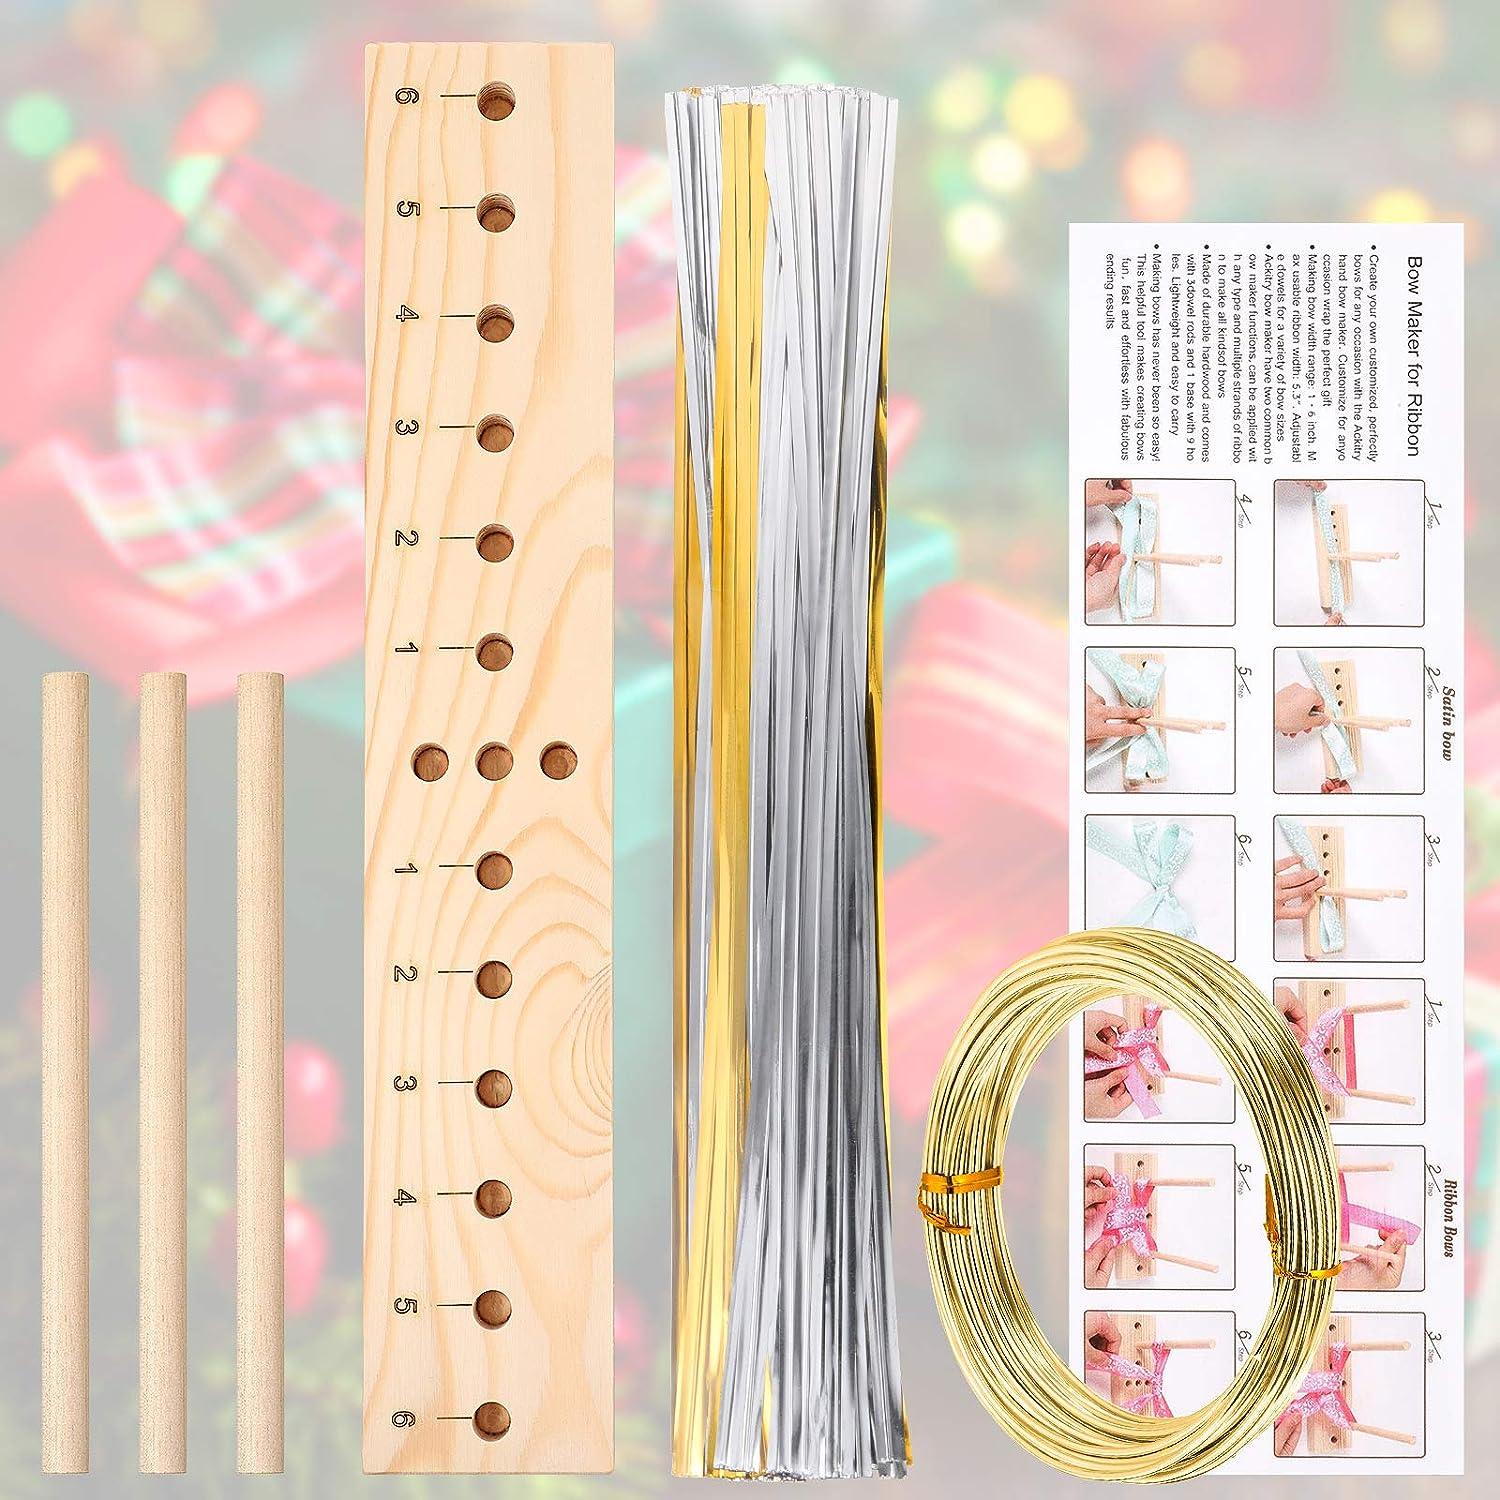  Bow Maker Round Wooden Bow Making Tool Christmas Party Ribbon  Bow Tool Corsages Bows Maker Ribbon for Wreaths Holiday Bows Decorations  Christmas Bows Ornament Gift Bow Crafts Major : Arts, Crafts